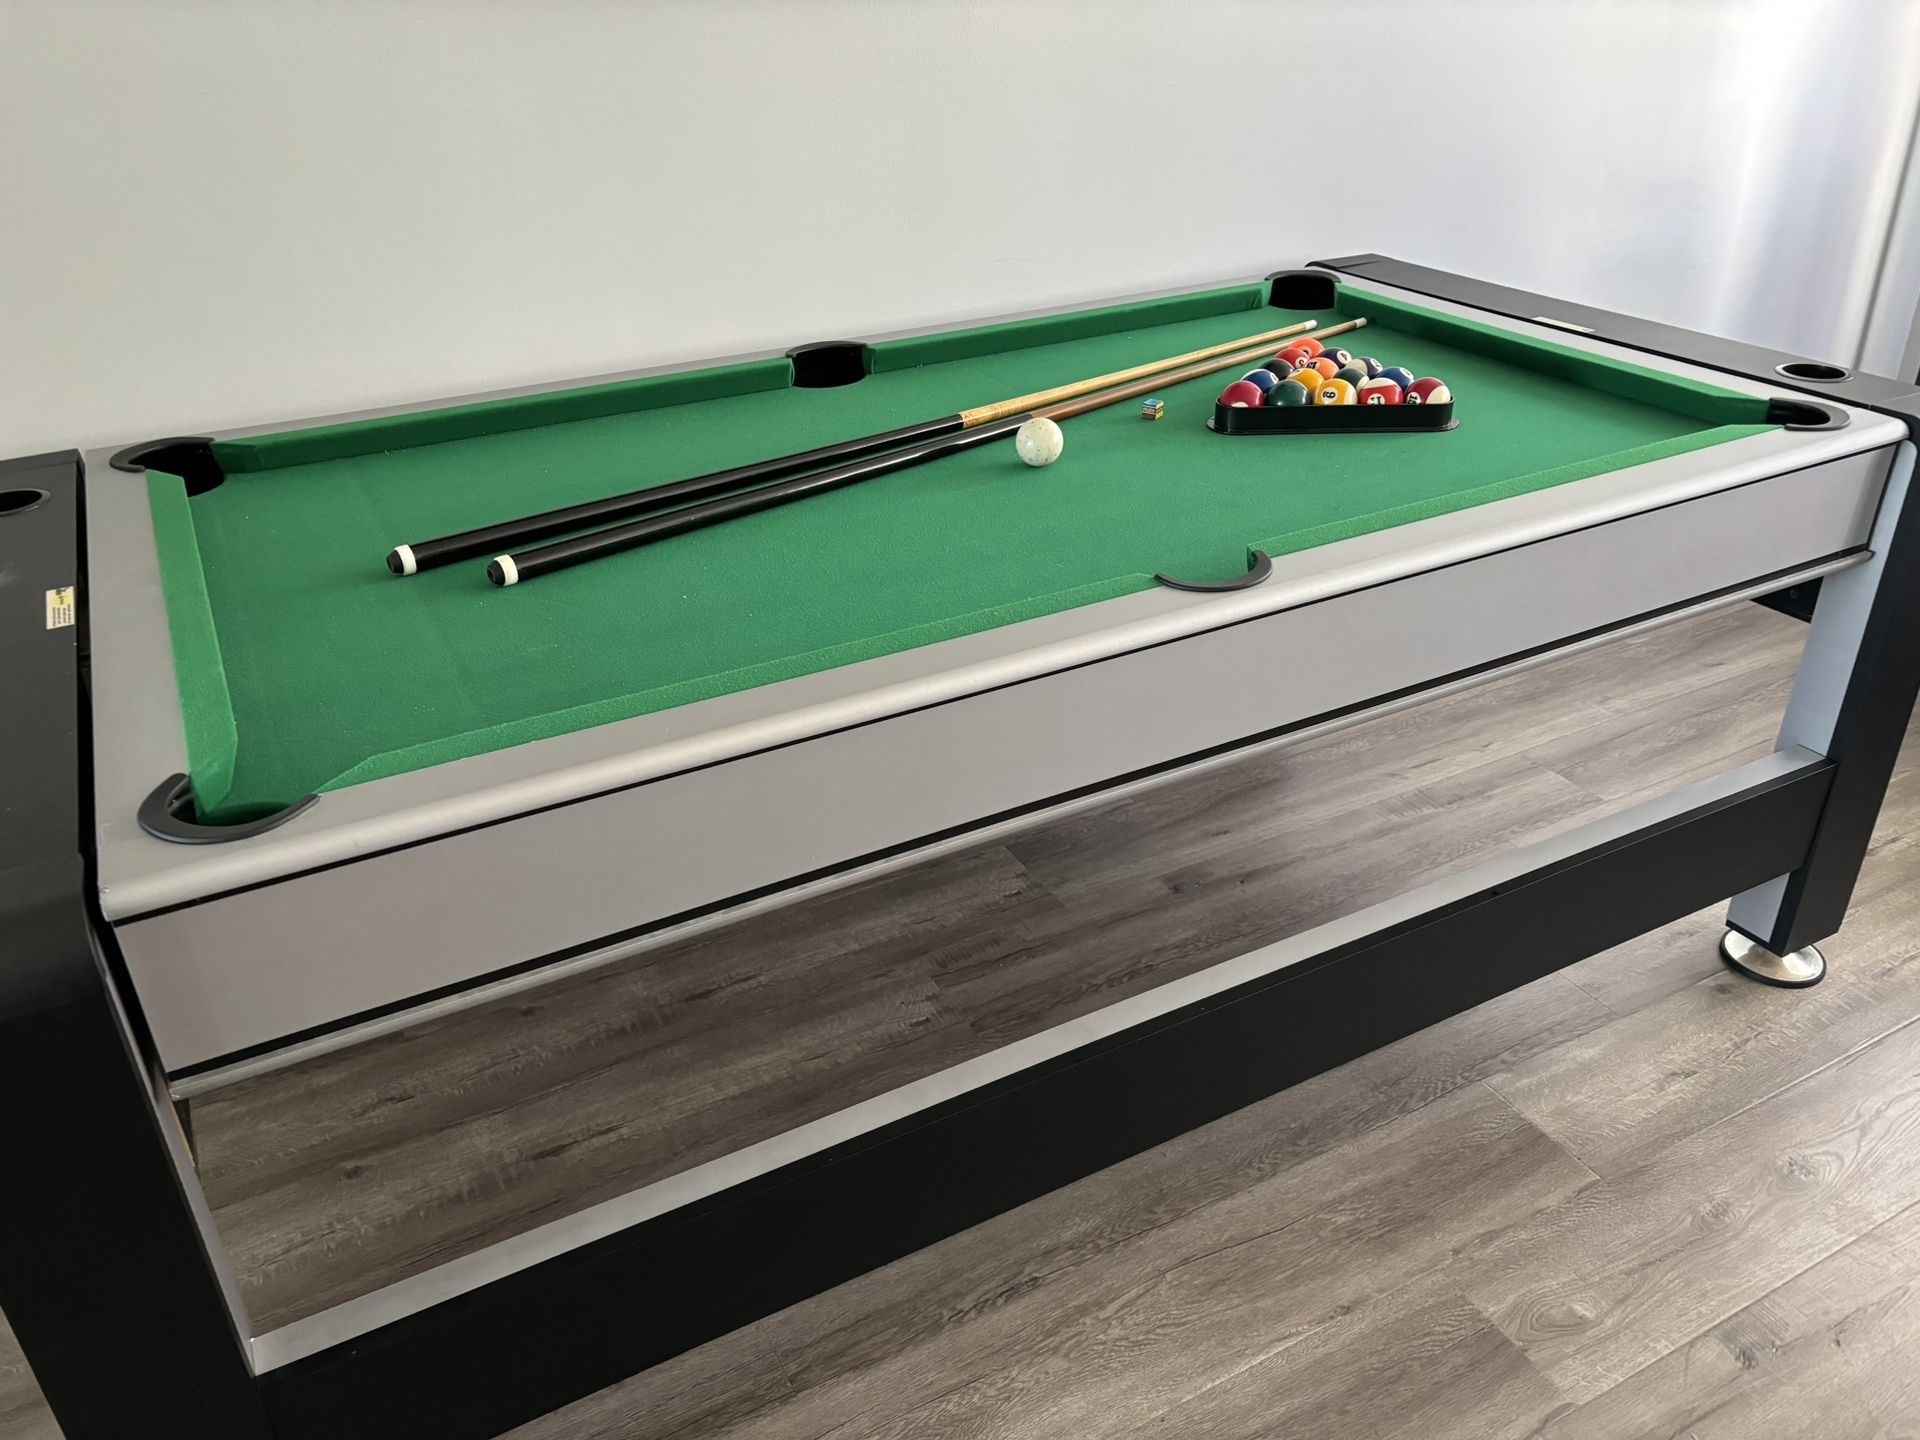 Combination Pool / Air Hockey / Ping Pong Game Table With All Accessories Included